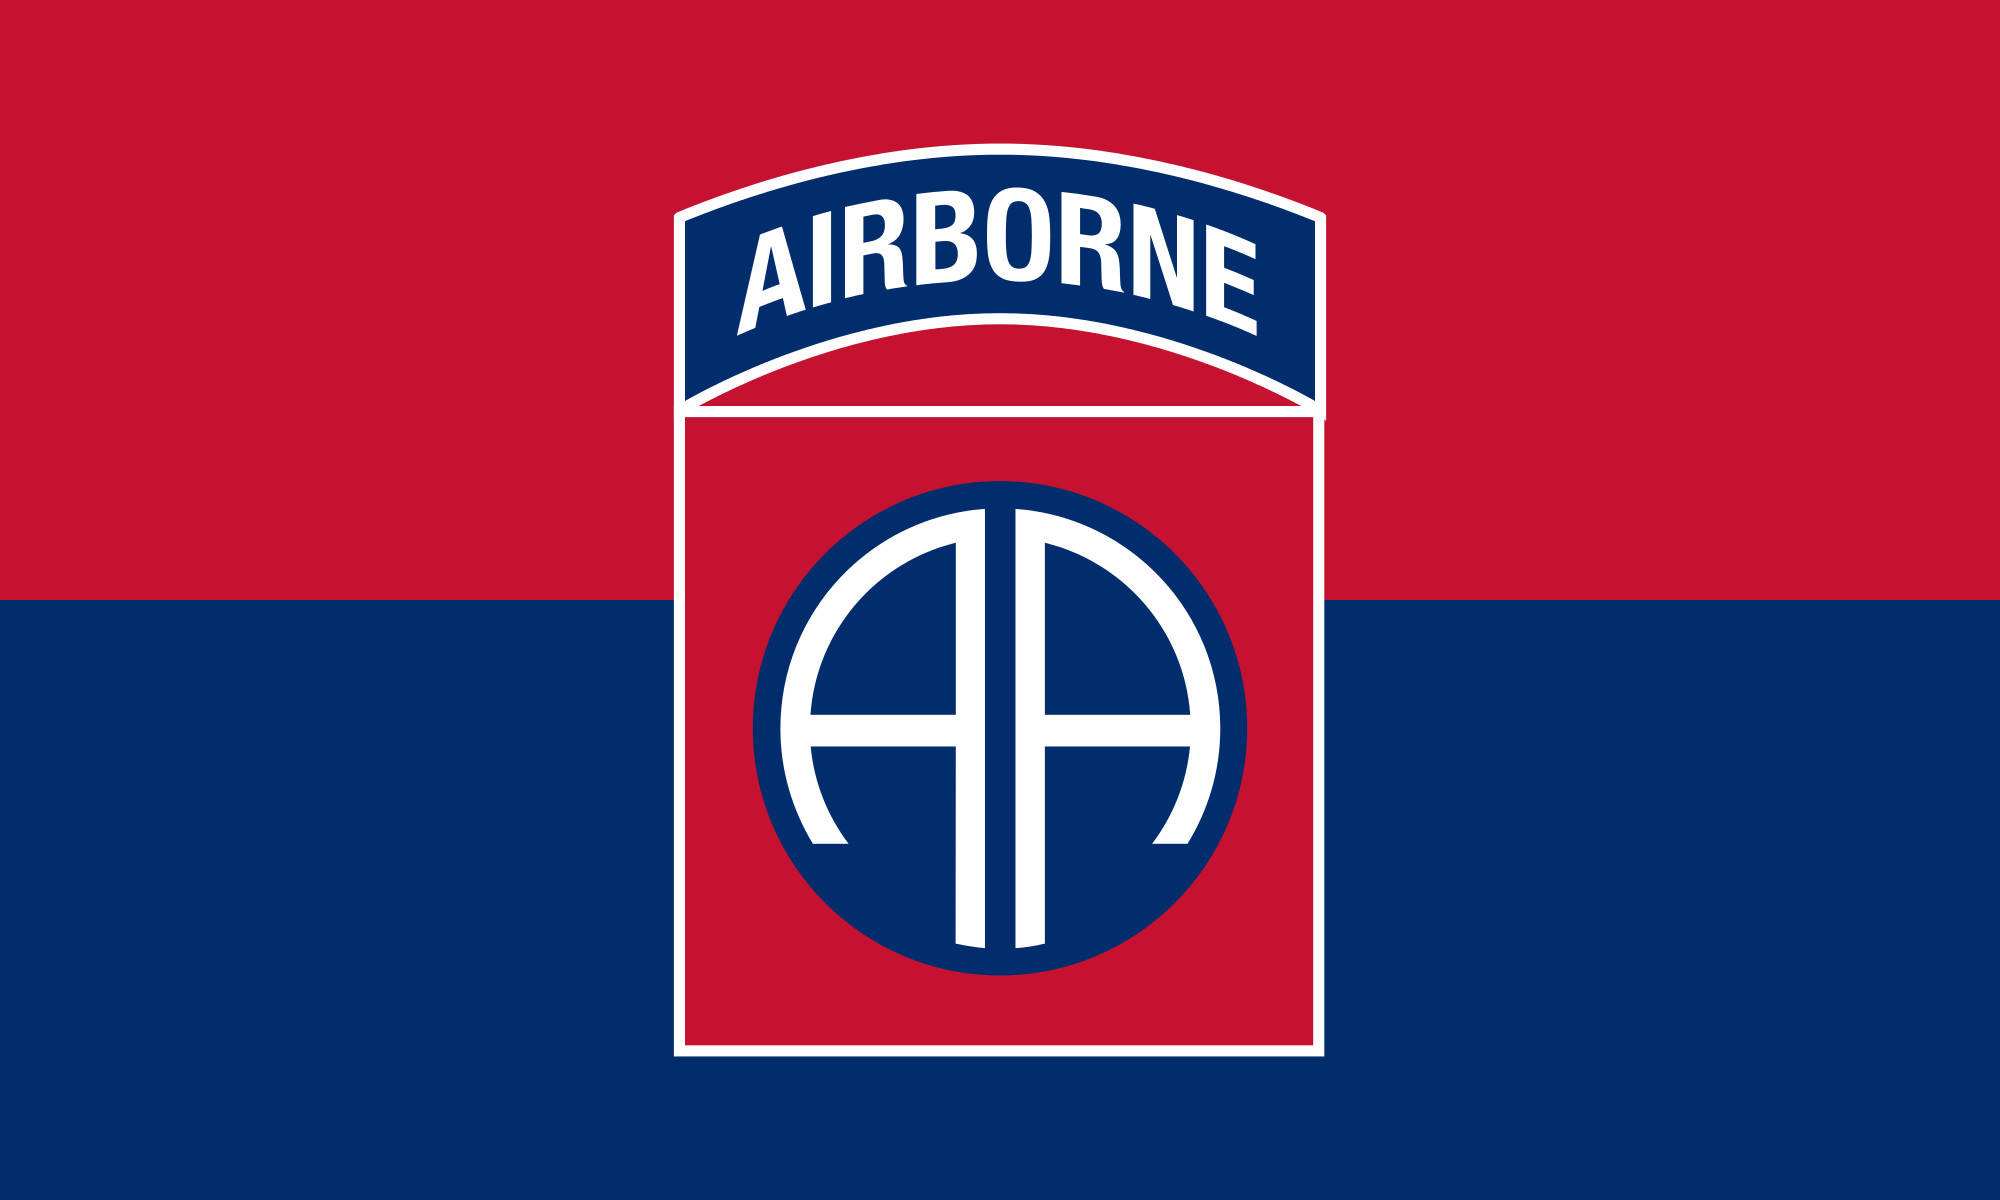 2000x1200 United States Army 82nd Airborne Division